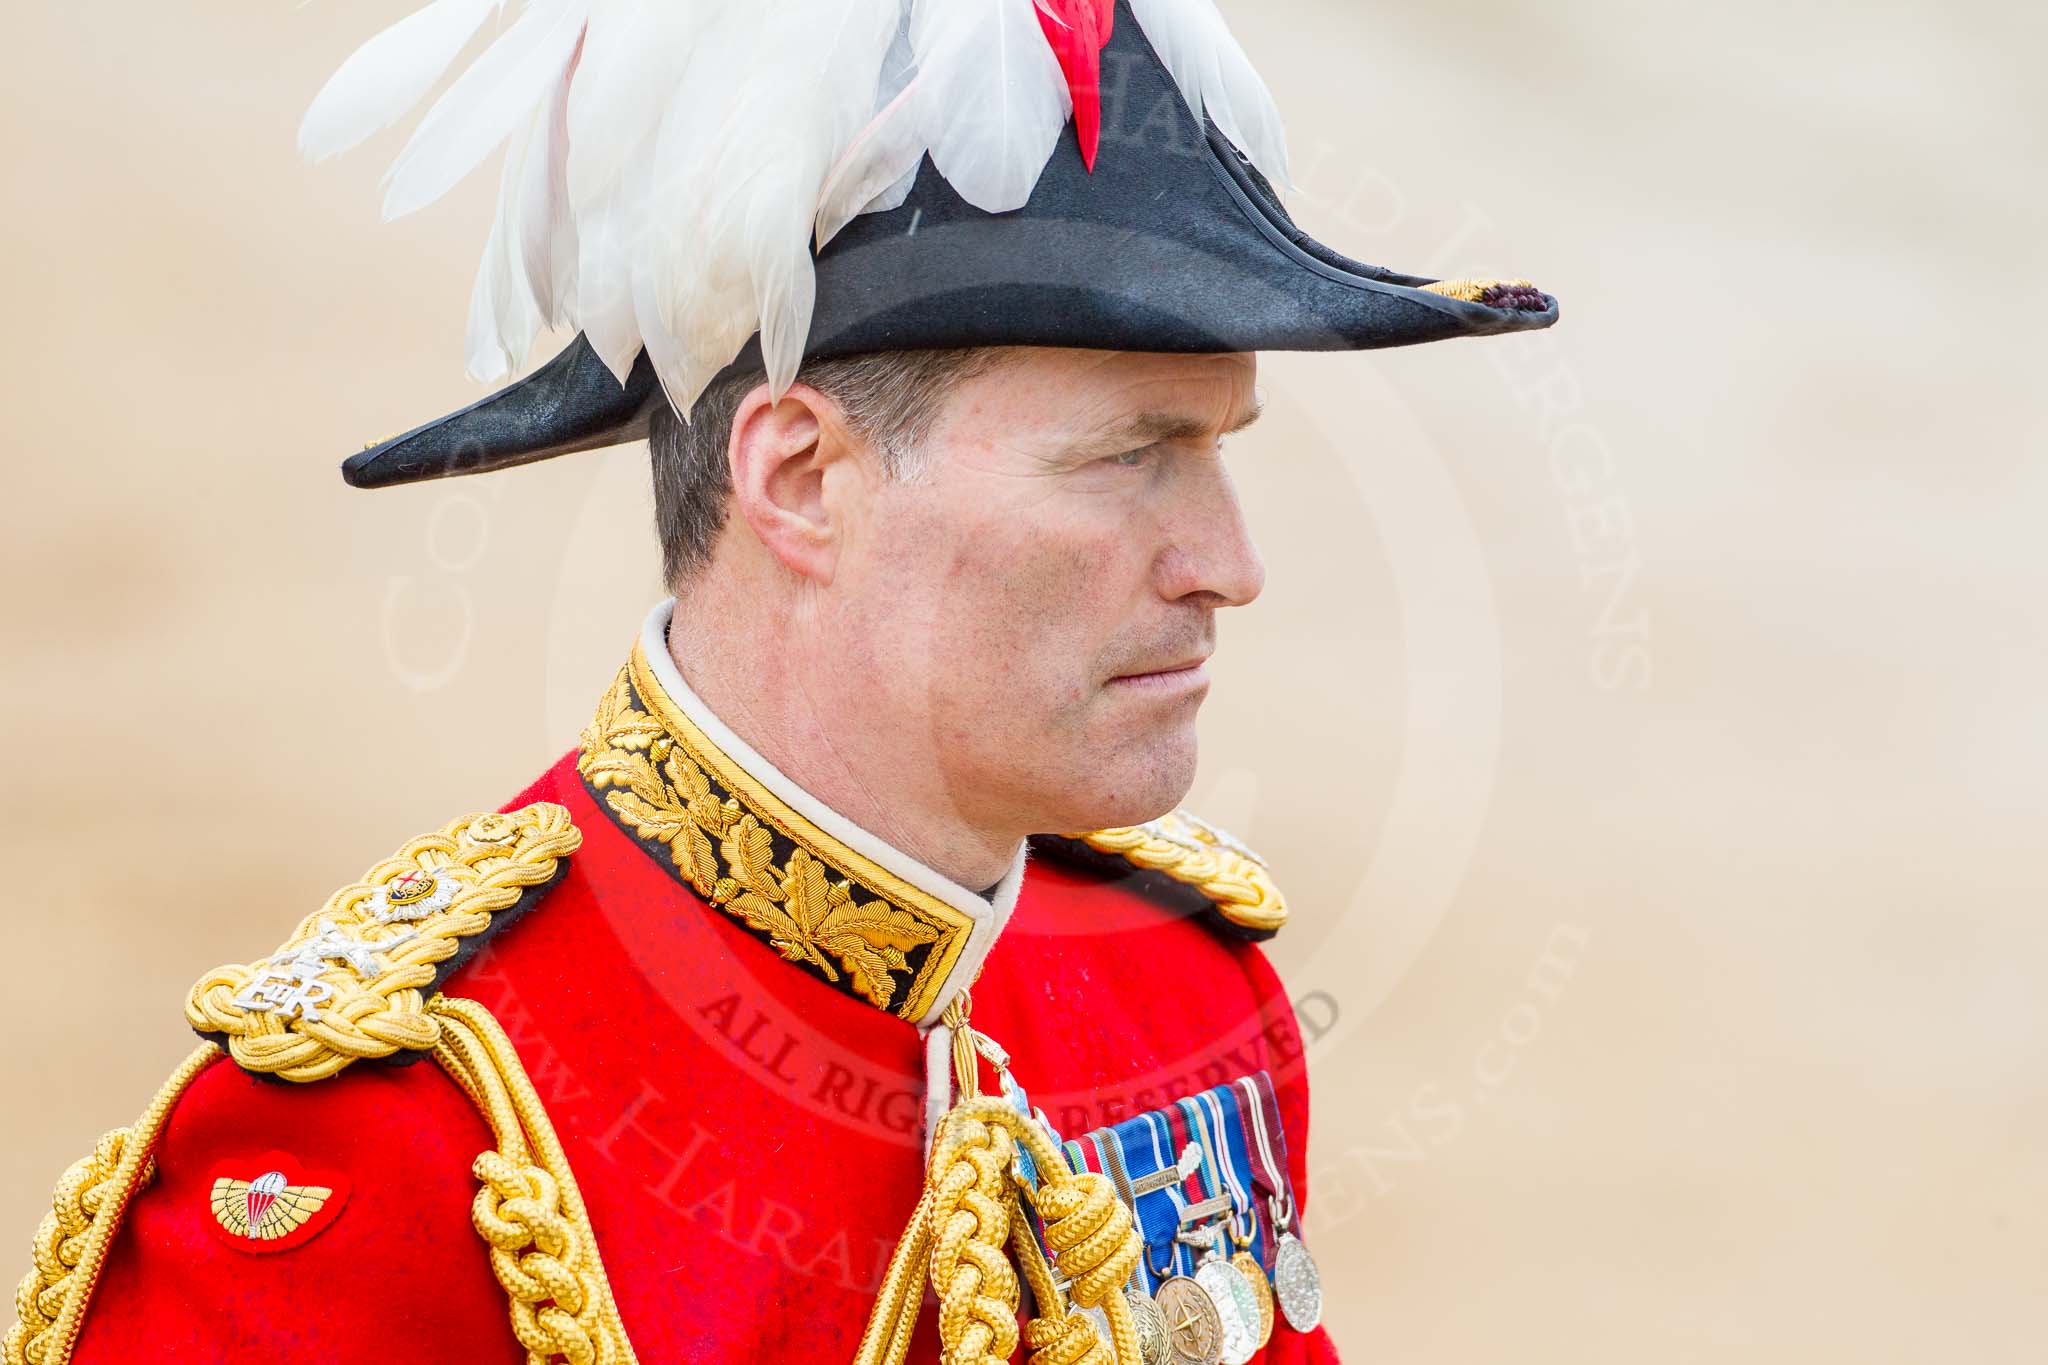 The Colonel's Review 2014.
Horse Guards Parade, Westminster,
London,

United Kingdom,
on 07 June 2014 at 11:06, image #314